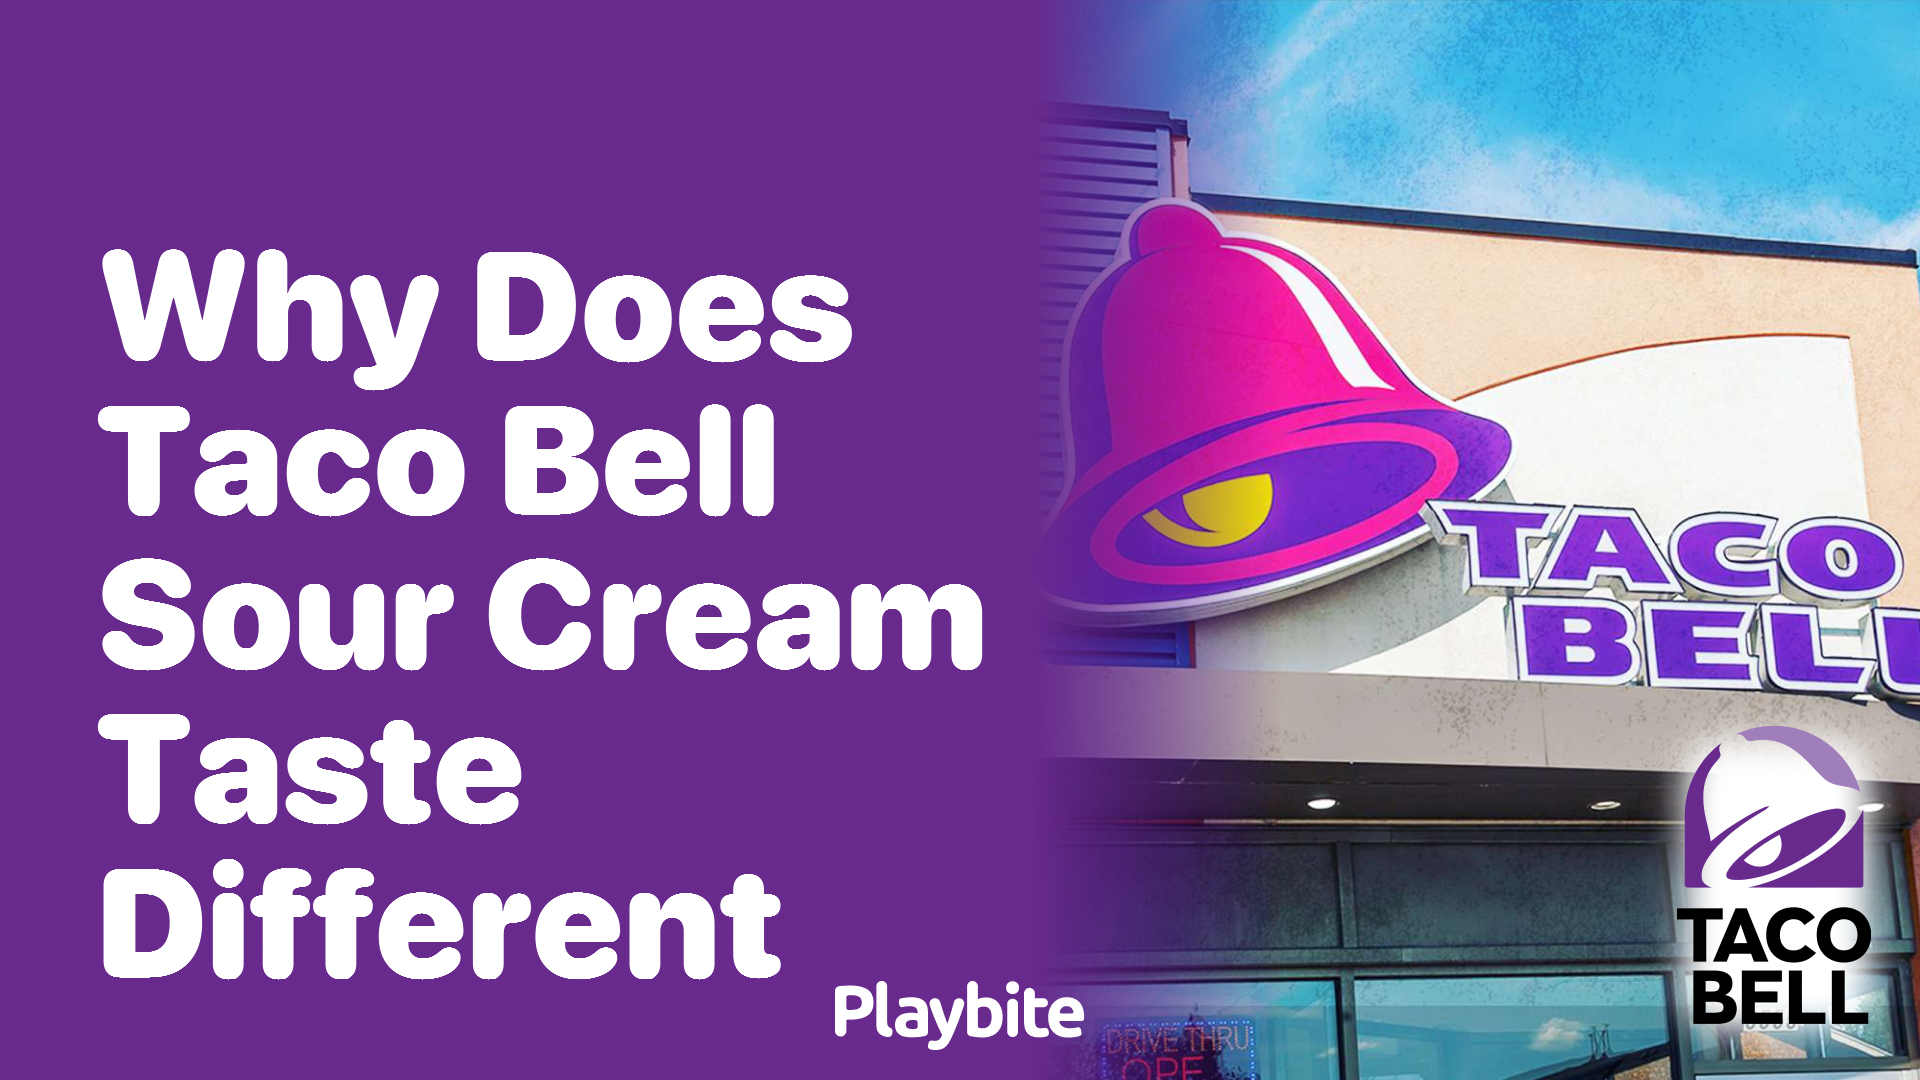 Why Does Taco Bell Sour Cream Taste Different?